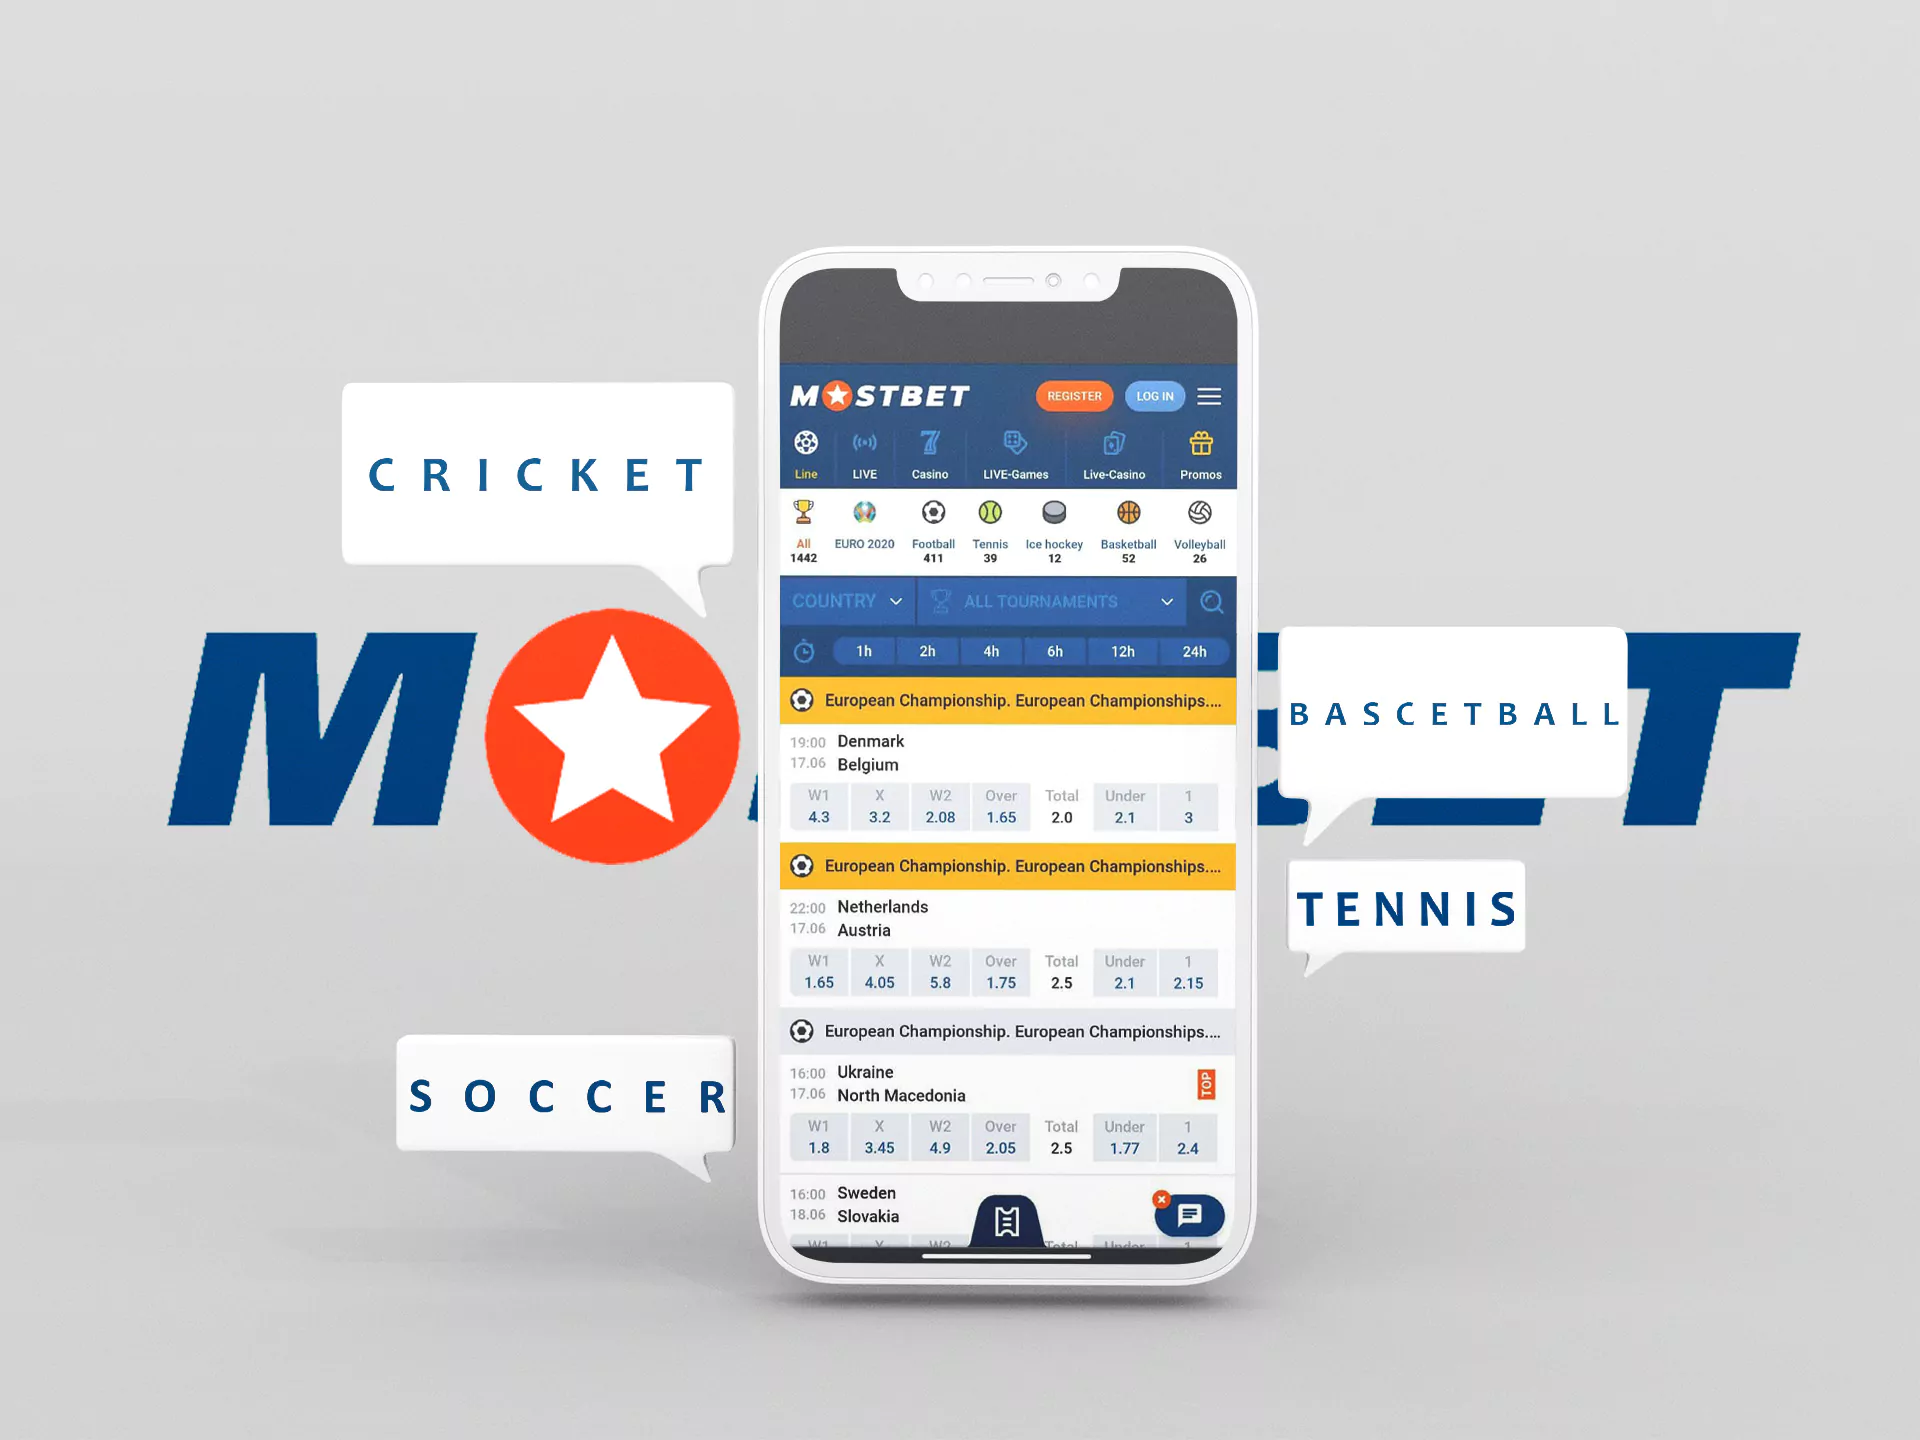 You can easily bet on different sports on the site or via the mobile app.